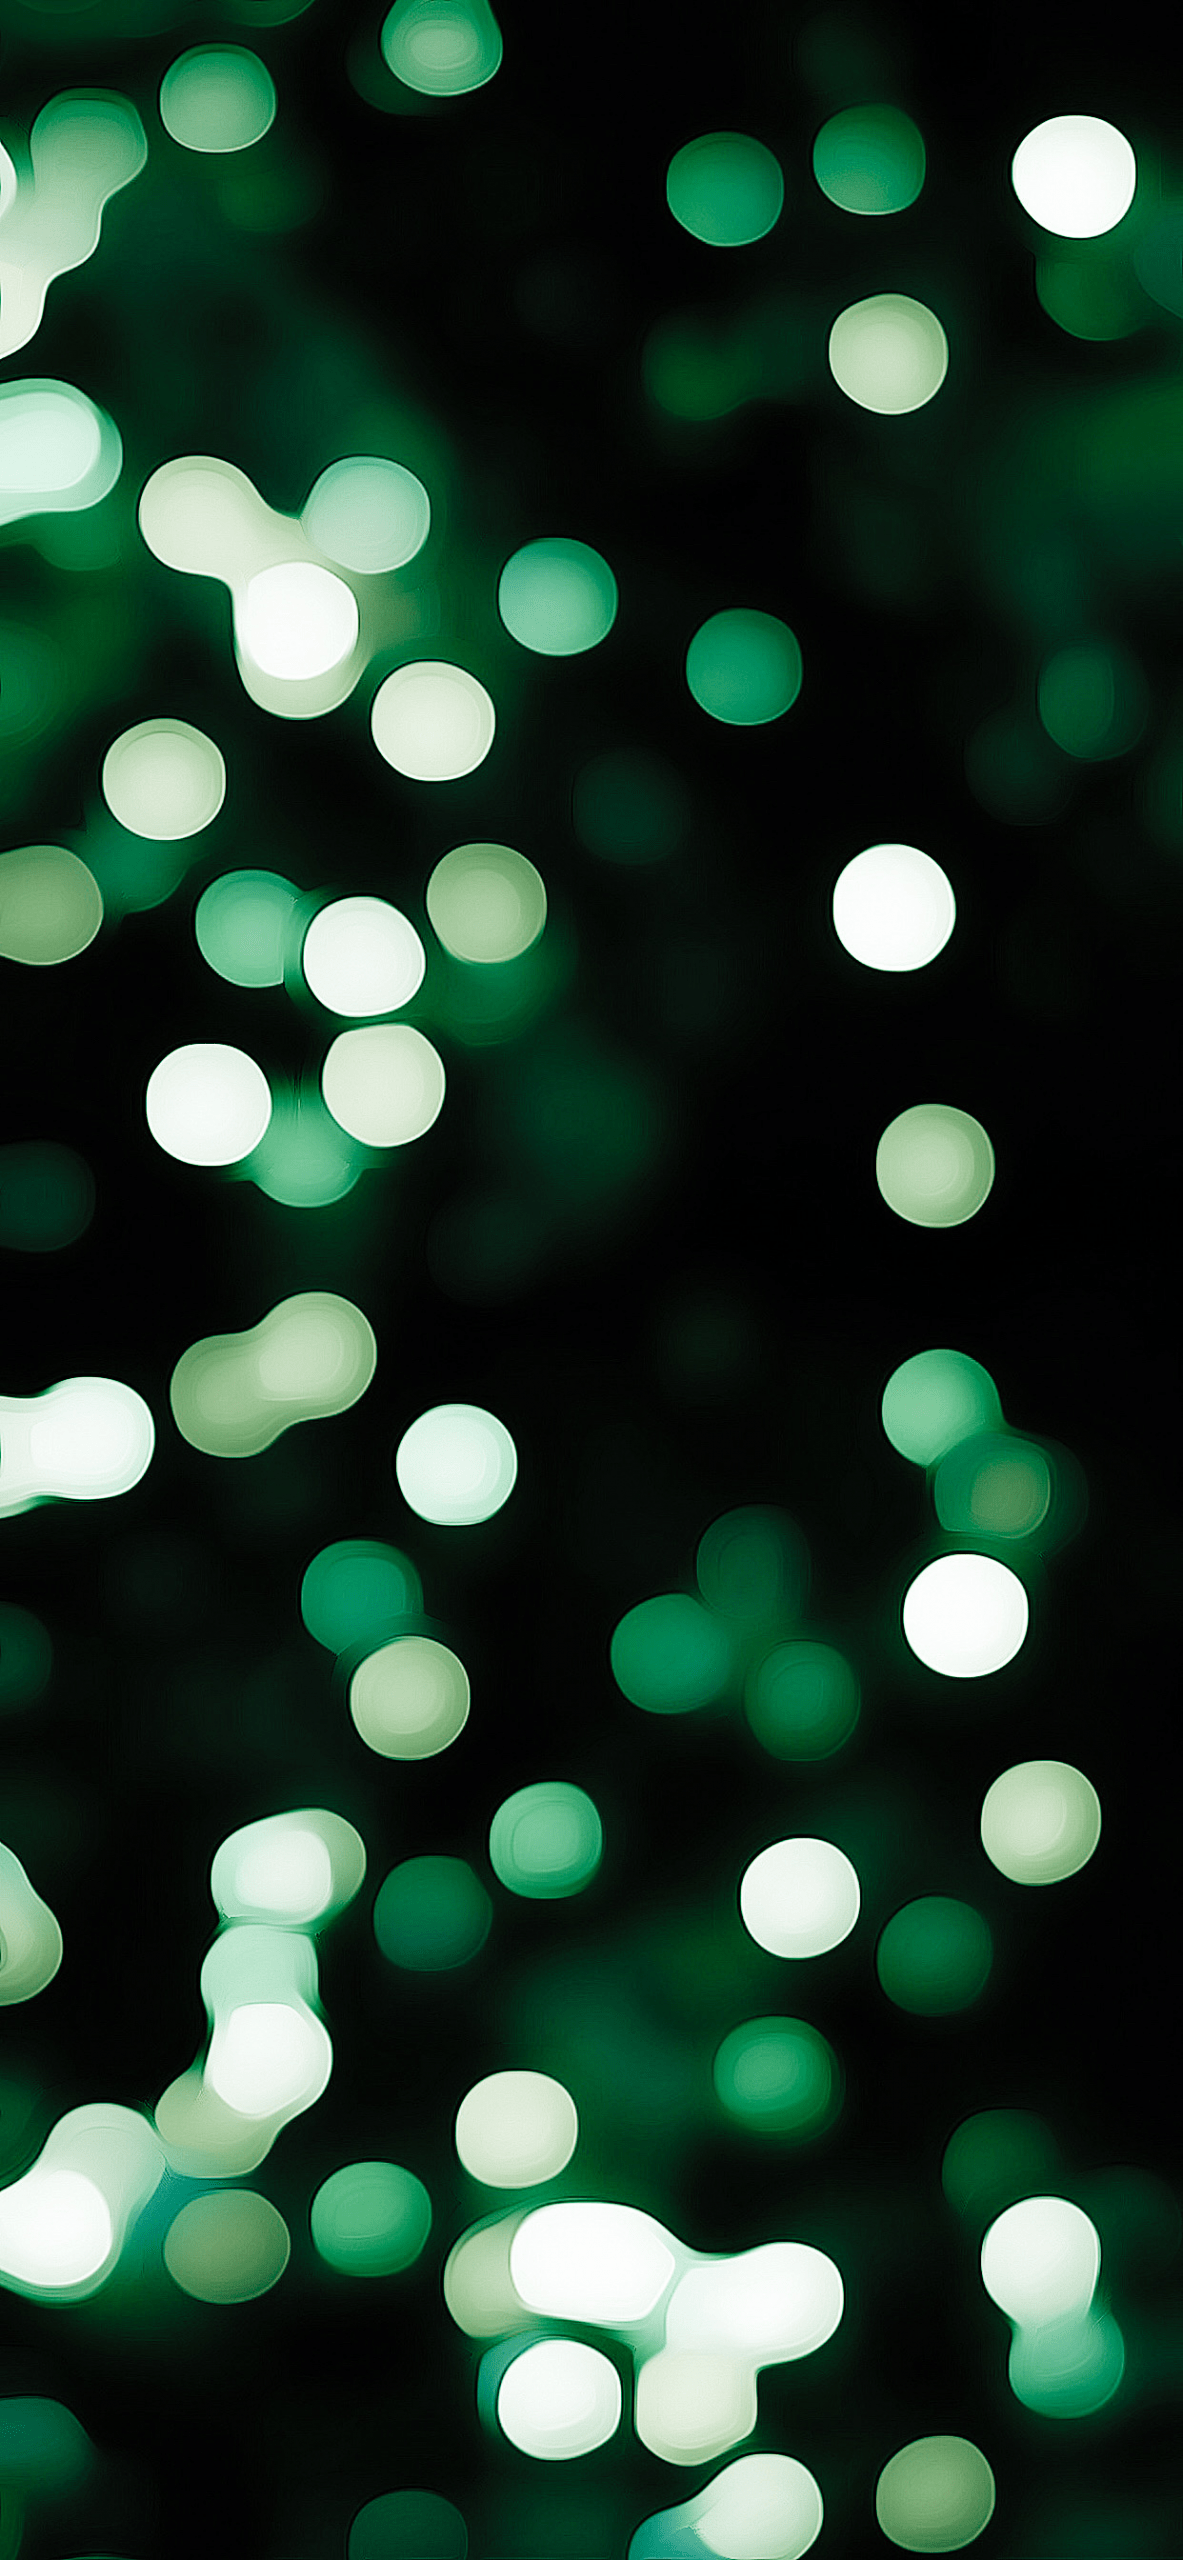 Green Christmas Wallpaper Background Wallpaper Image For Free Download   Pngtree